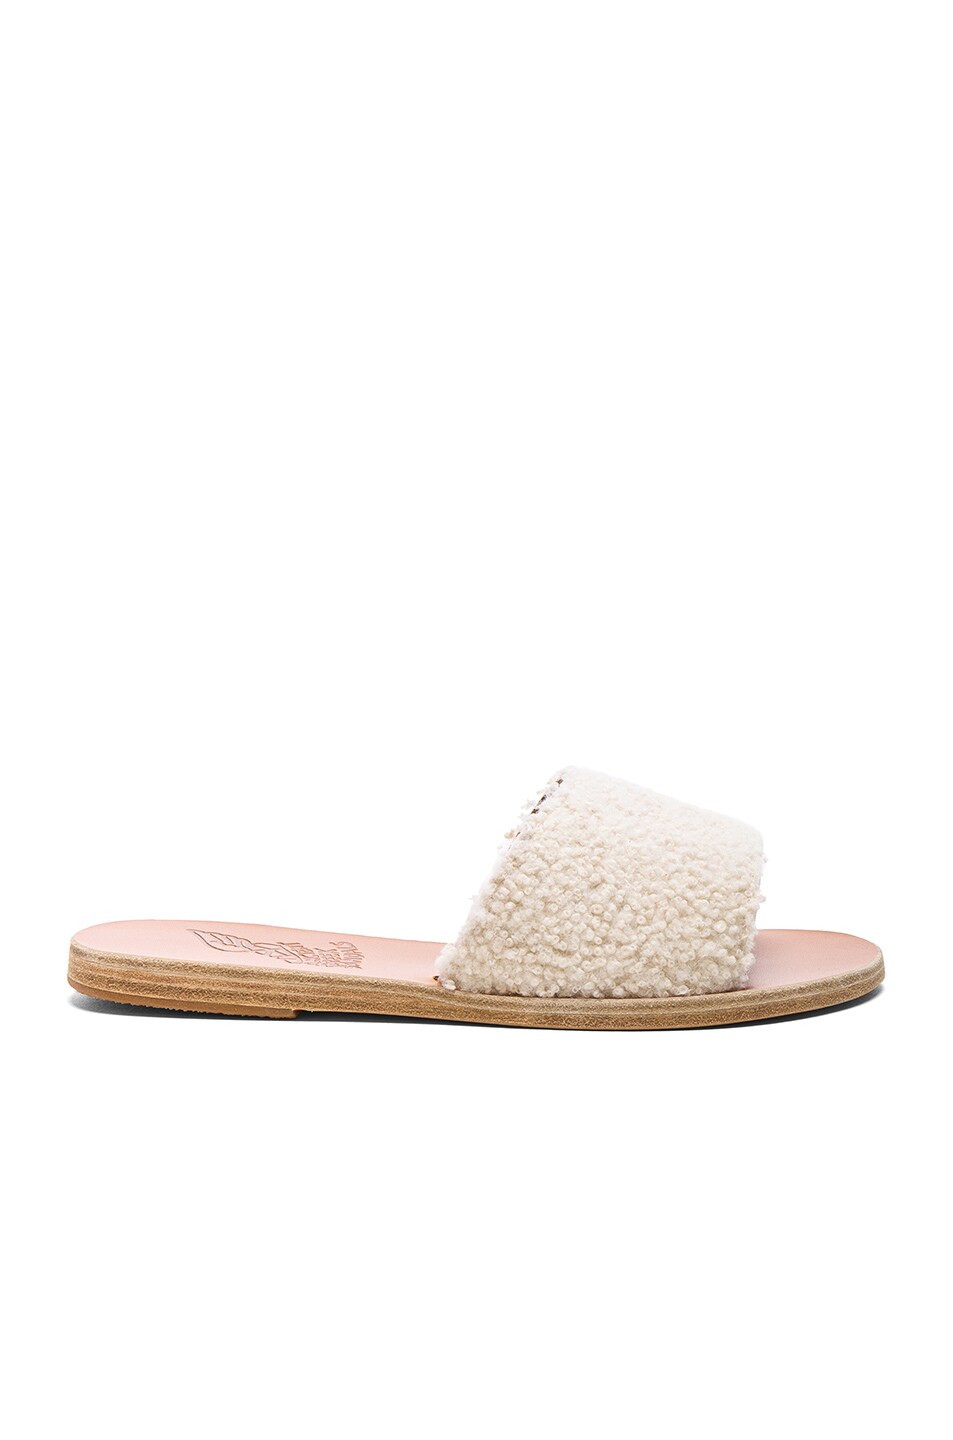 Image 1 of Ancient Greek Sandals Sheep Fur Taygete Sandals in White